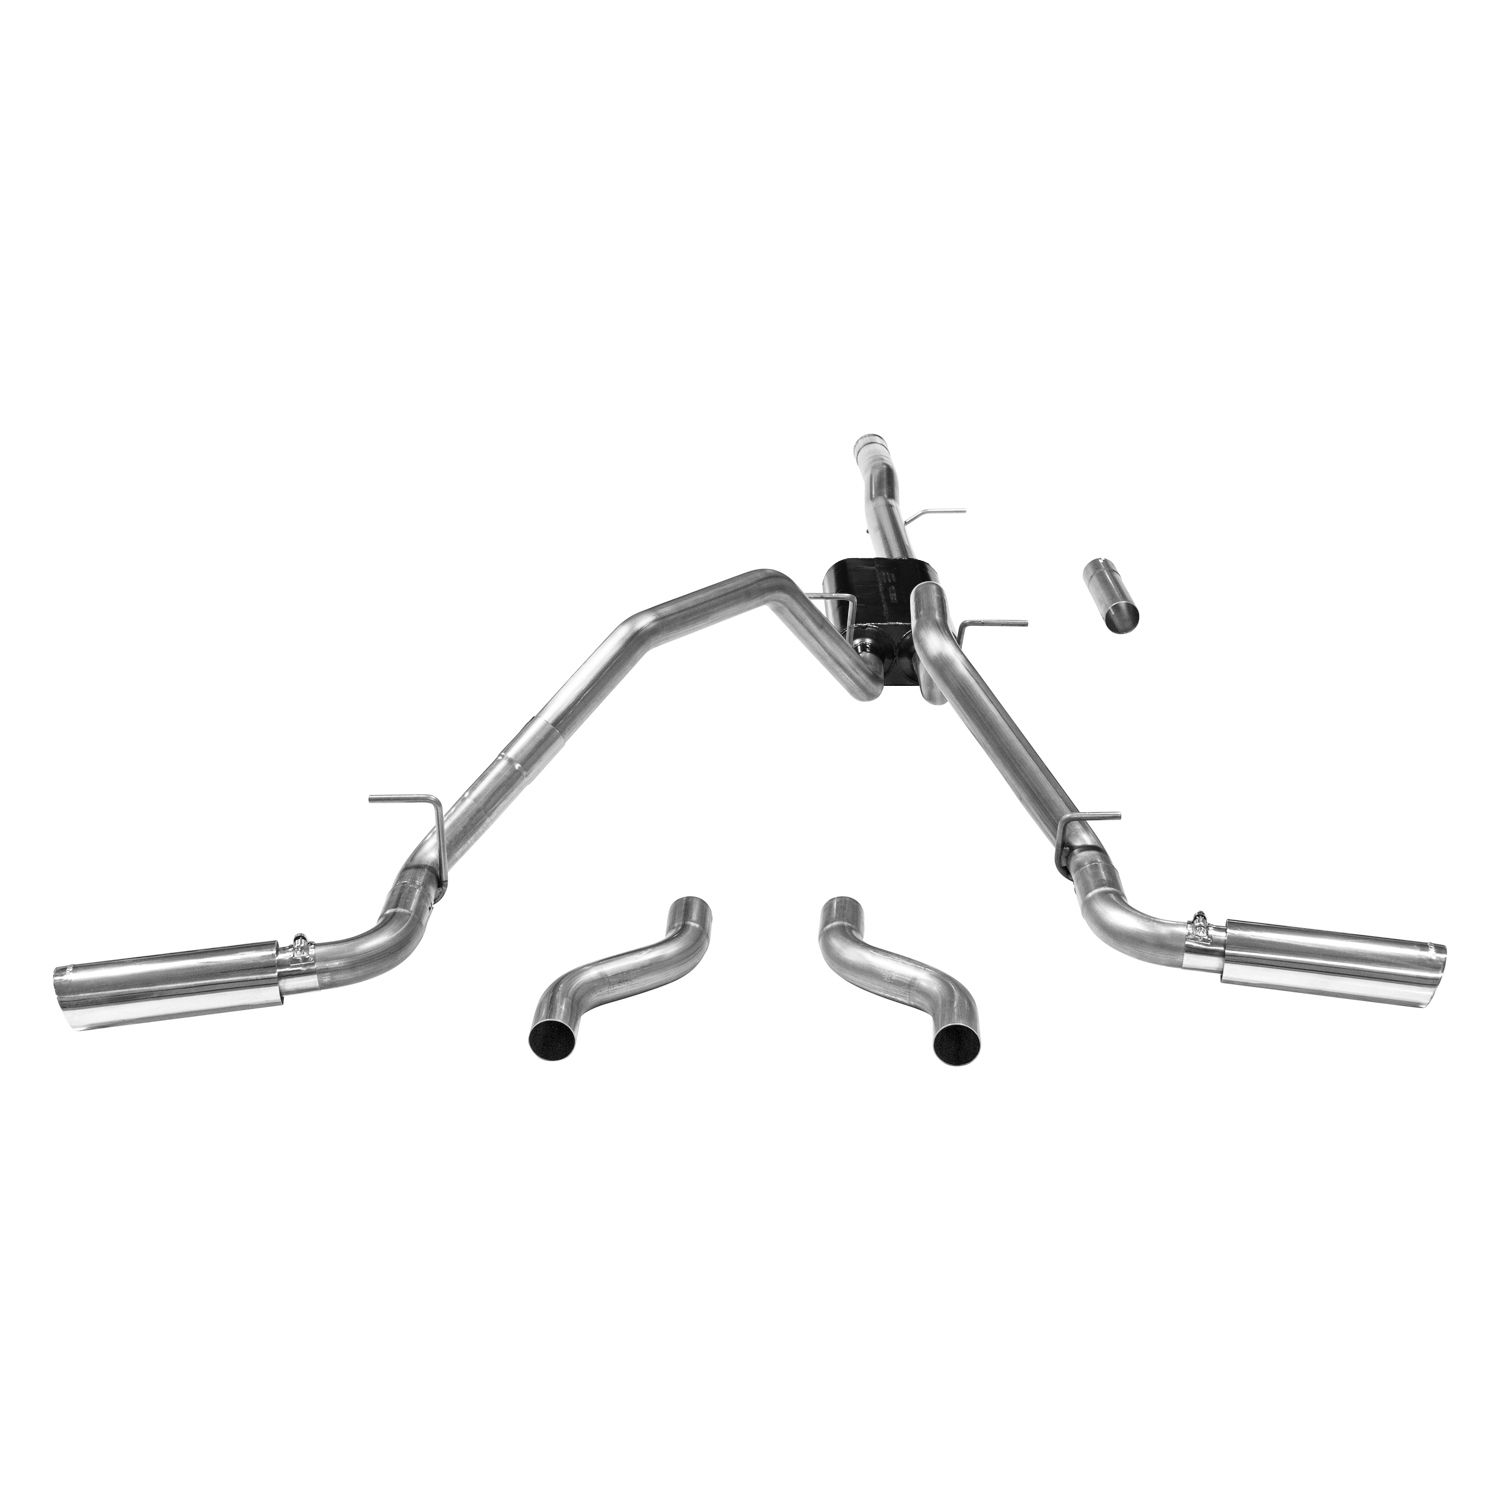 2011-2018 GMC Sierra 1500 SLT 6.2L EXT Cab Flowmaster American Thunder Cat-Back Exhaust 69.3 inch Bed - 817602